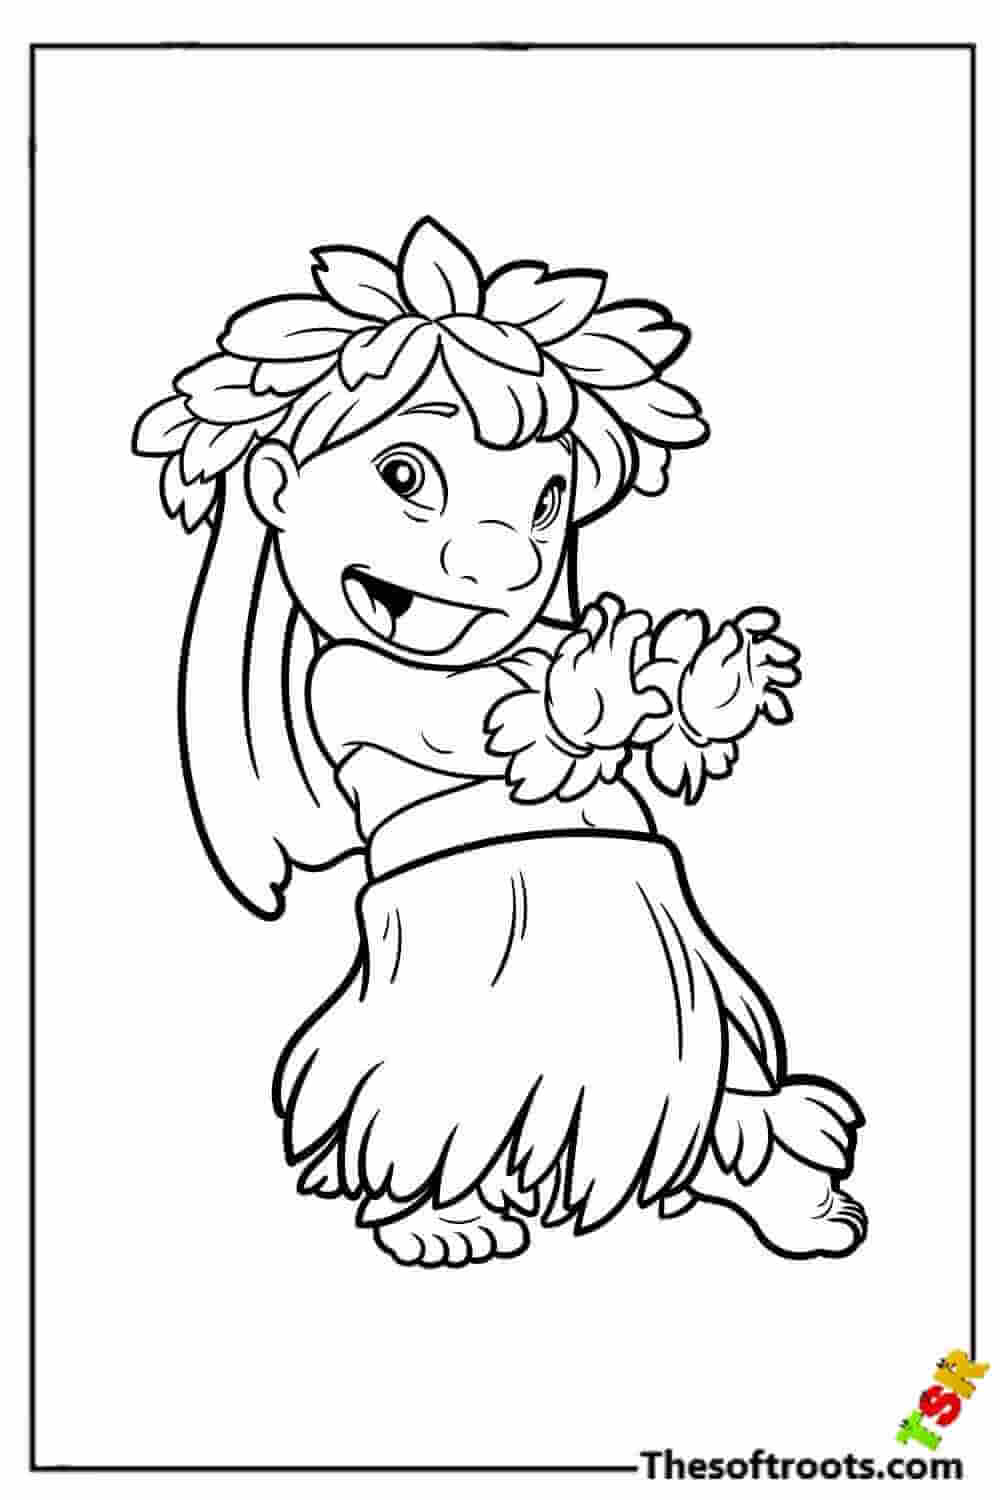 Happy Lilo coloring pages